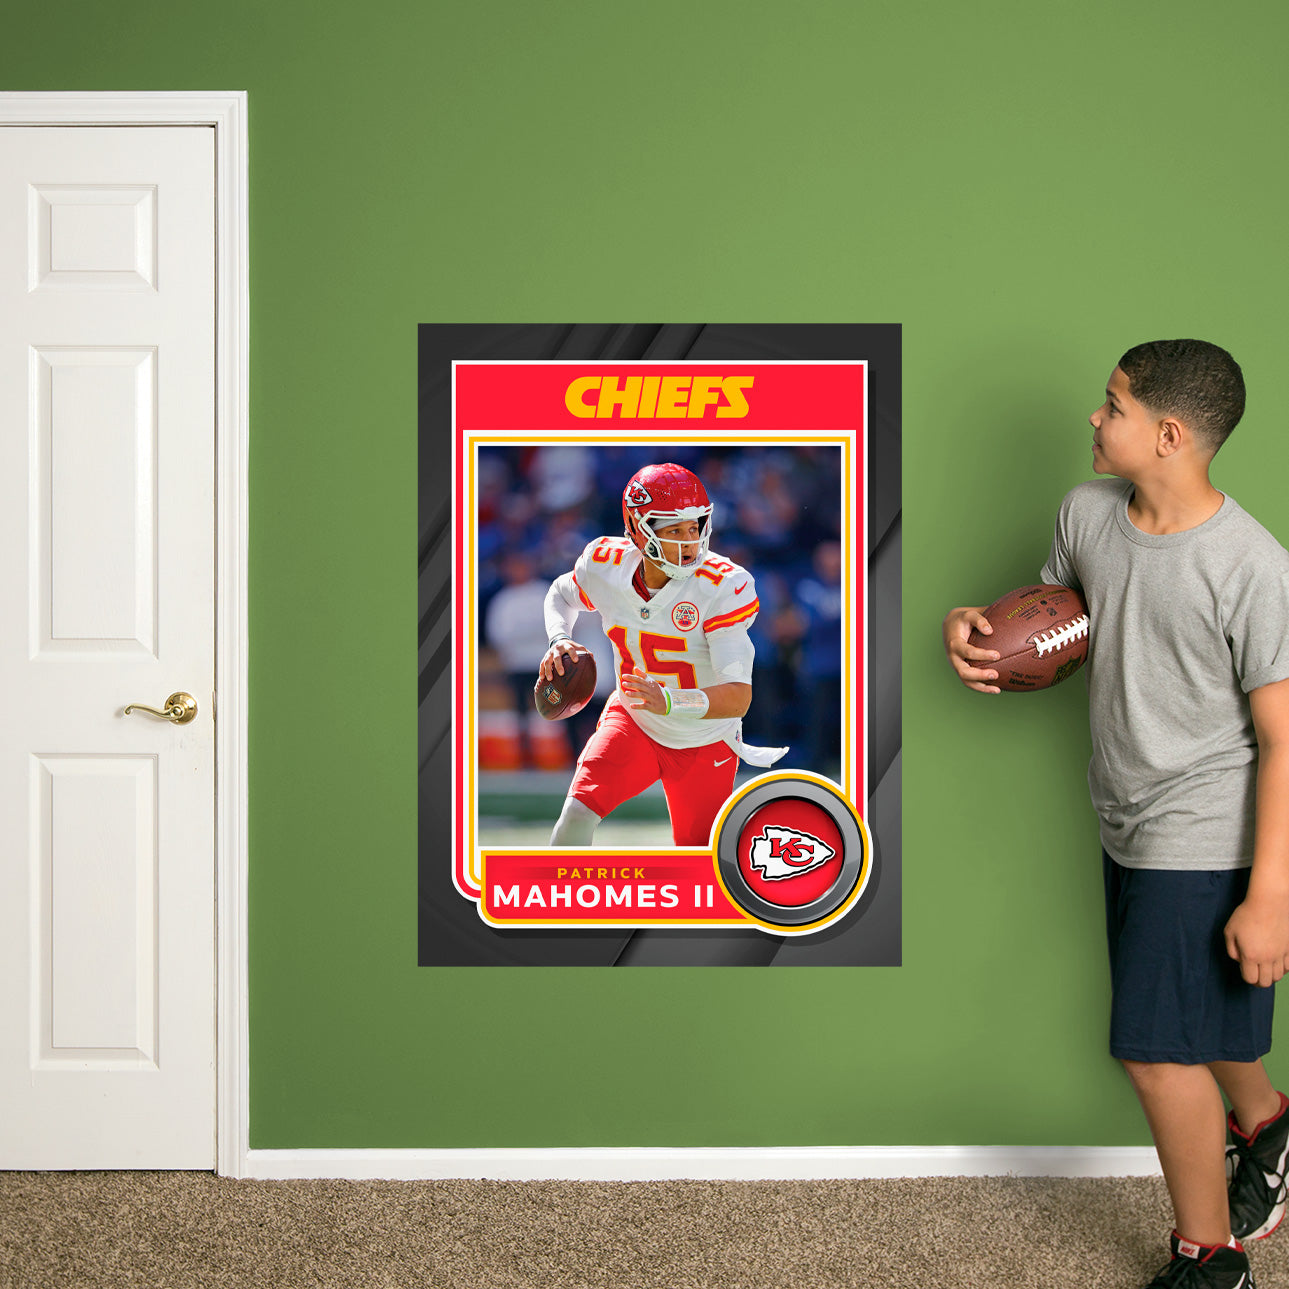 Kansas City Chiefs: Patrick Mahomes II  Poster        - Officially Licensed NFL Removable     Adhesive Decal